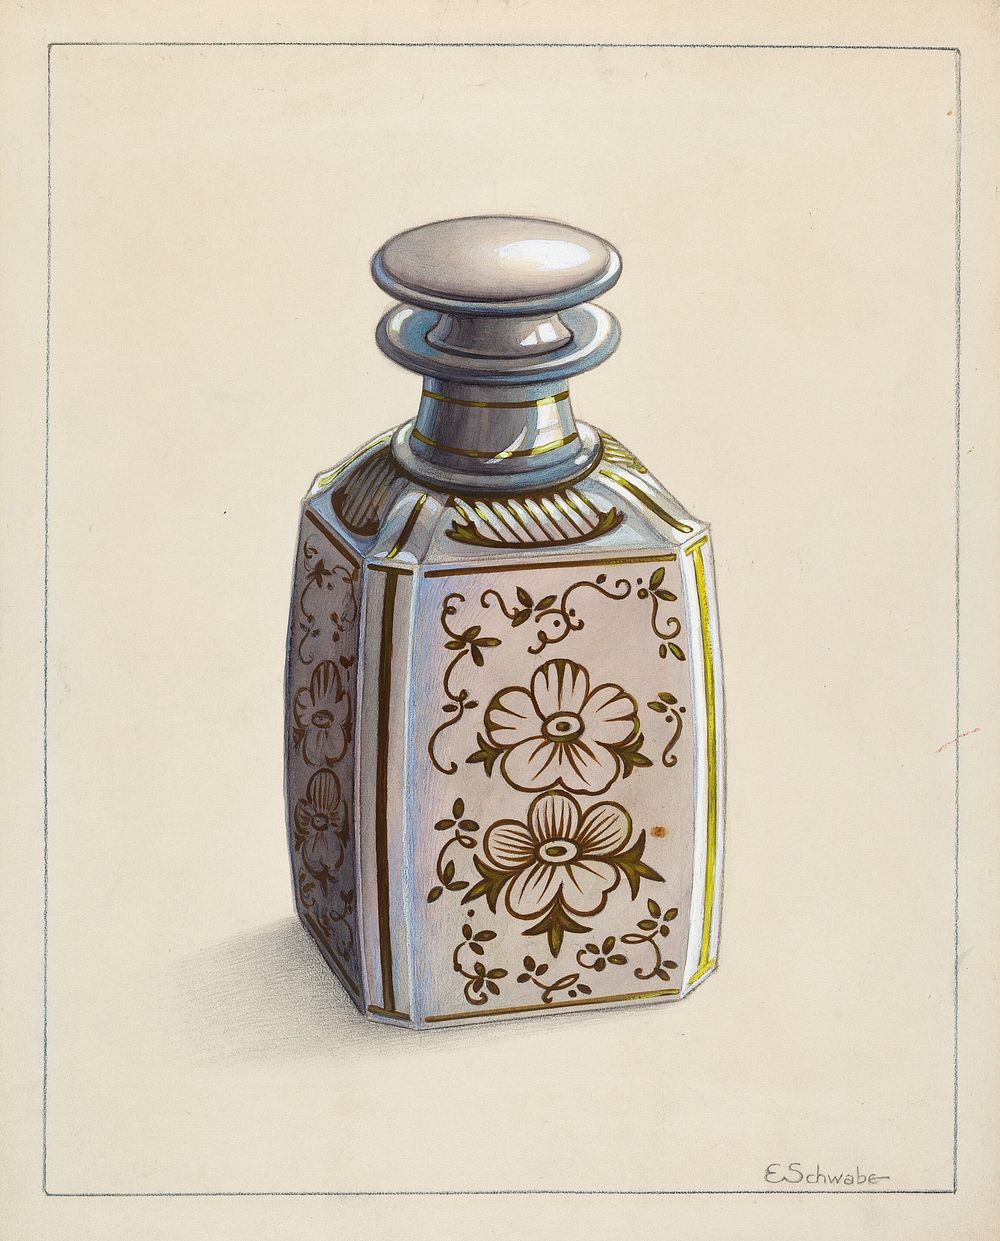 Perfume Bottle (ca. 1938) by Erwin Schwabe. Original from The National Gallery of Art. Digitally enhanced by rawpixel.